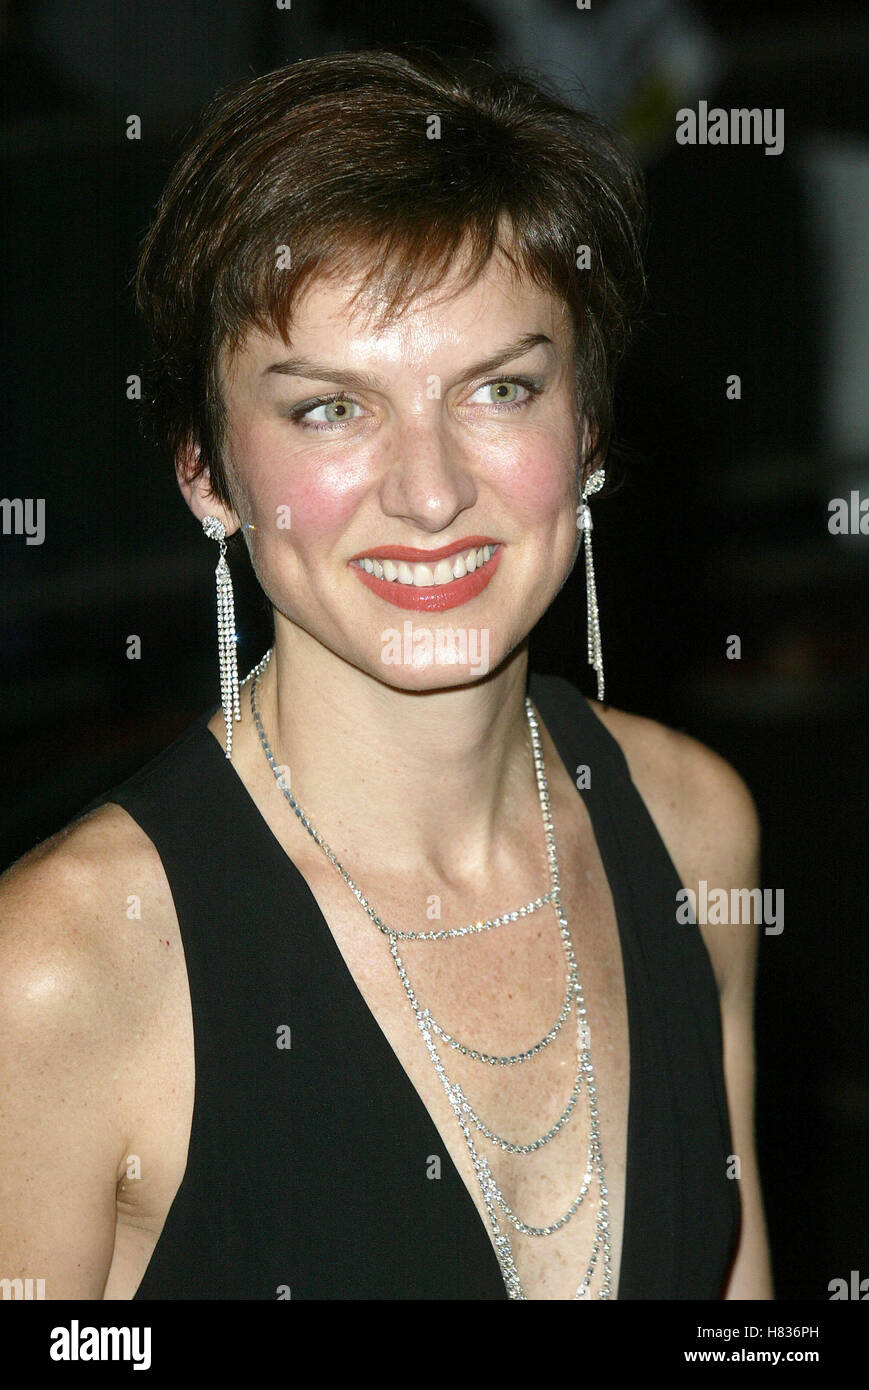 Fiona bruce hi-res stock photography and images - Alamy